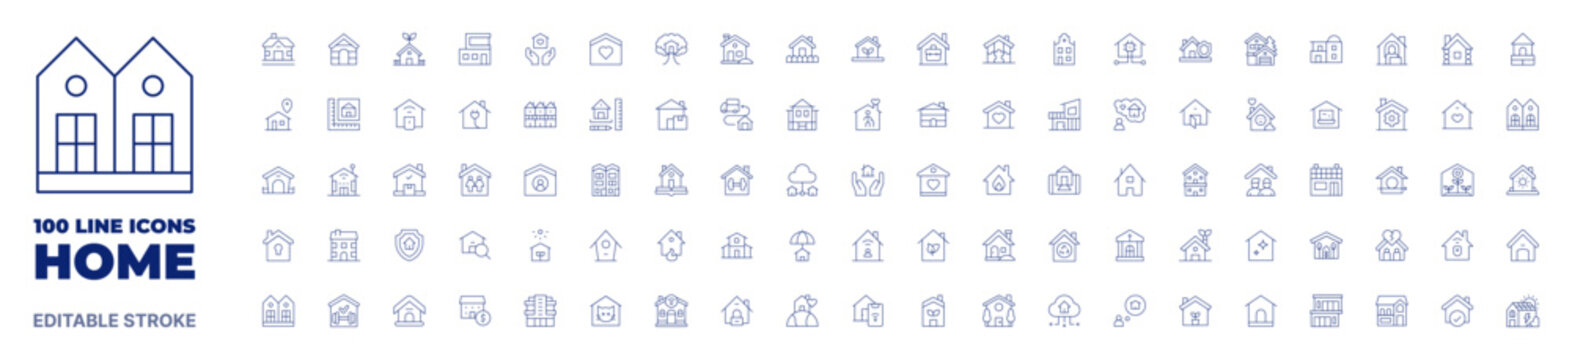 100 icons Home collection. Thin line icon. Editable stroke. Home icons for web and mobile app.